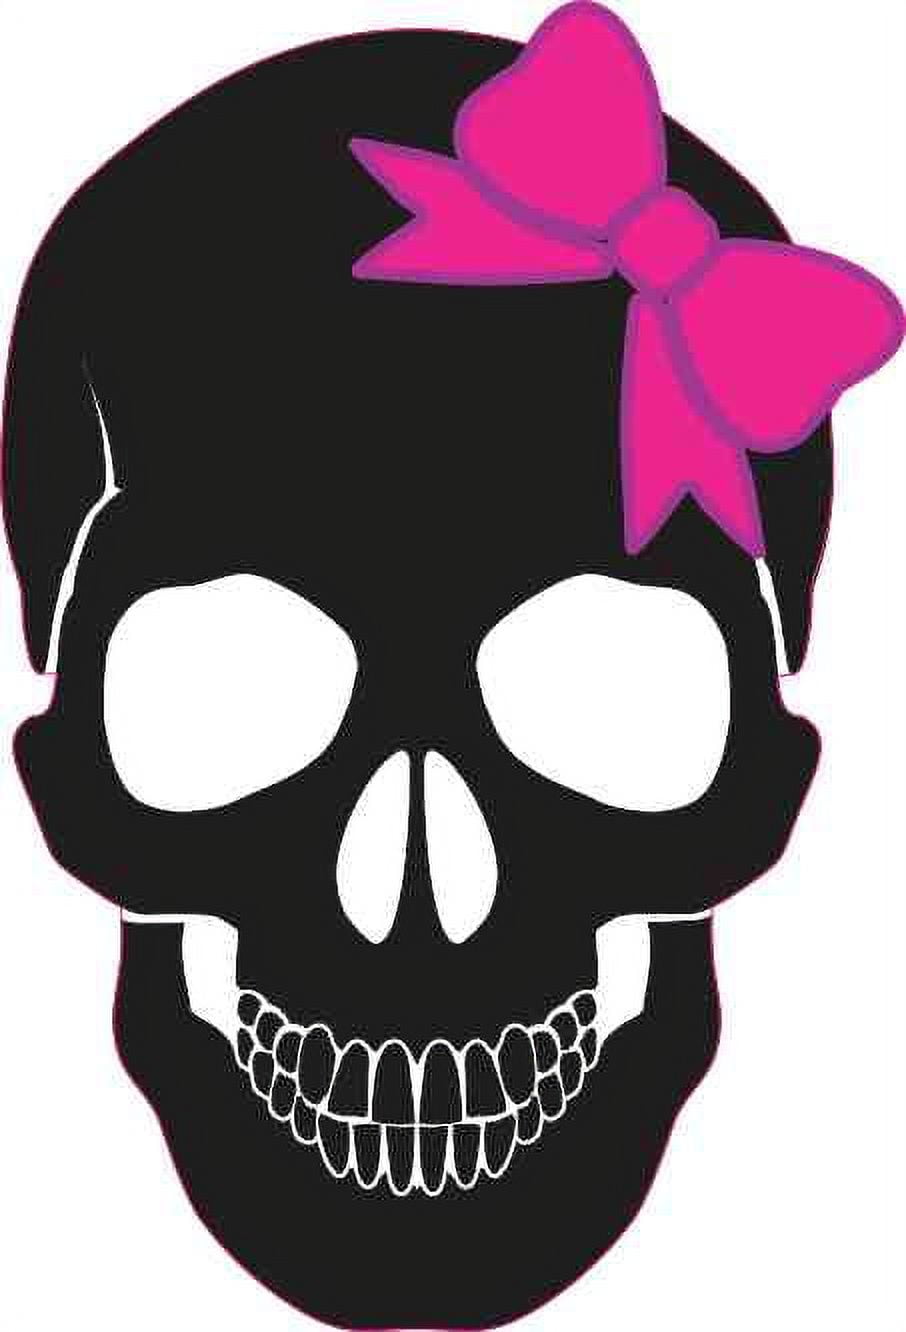 pink and black skull and crossbones